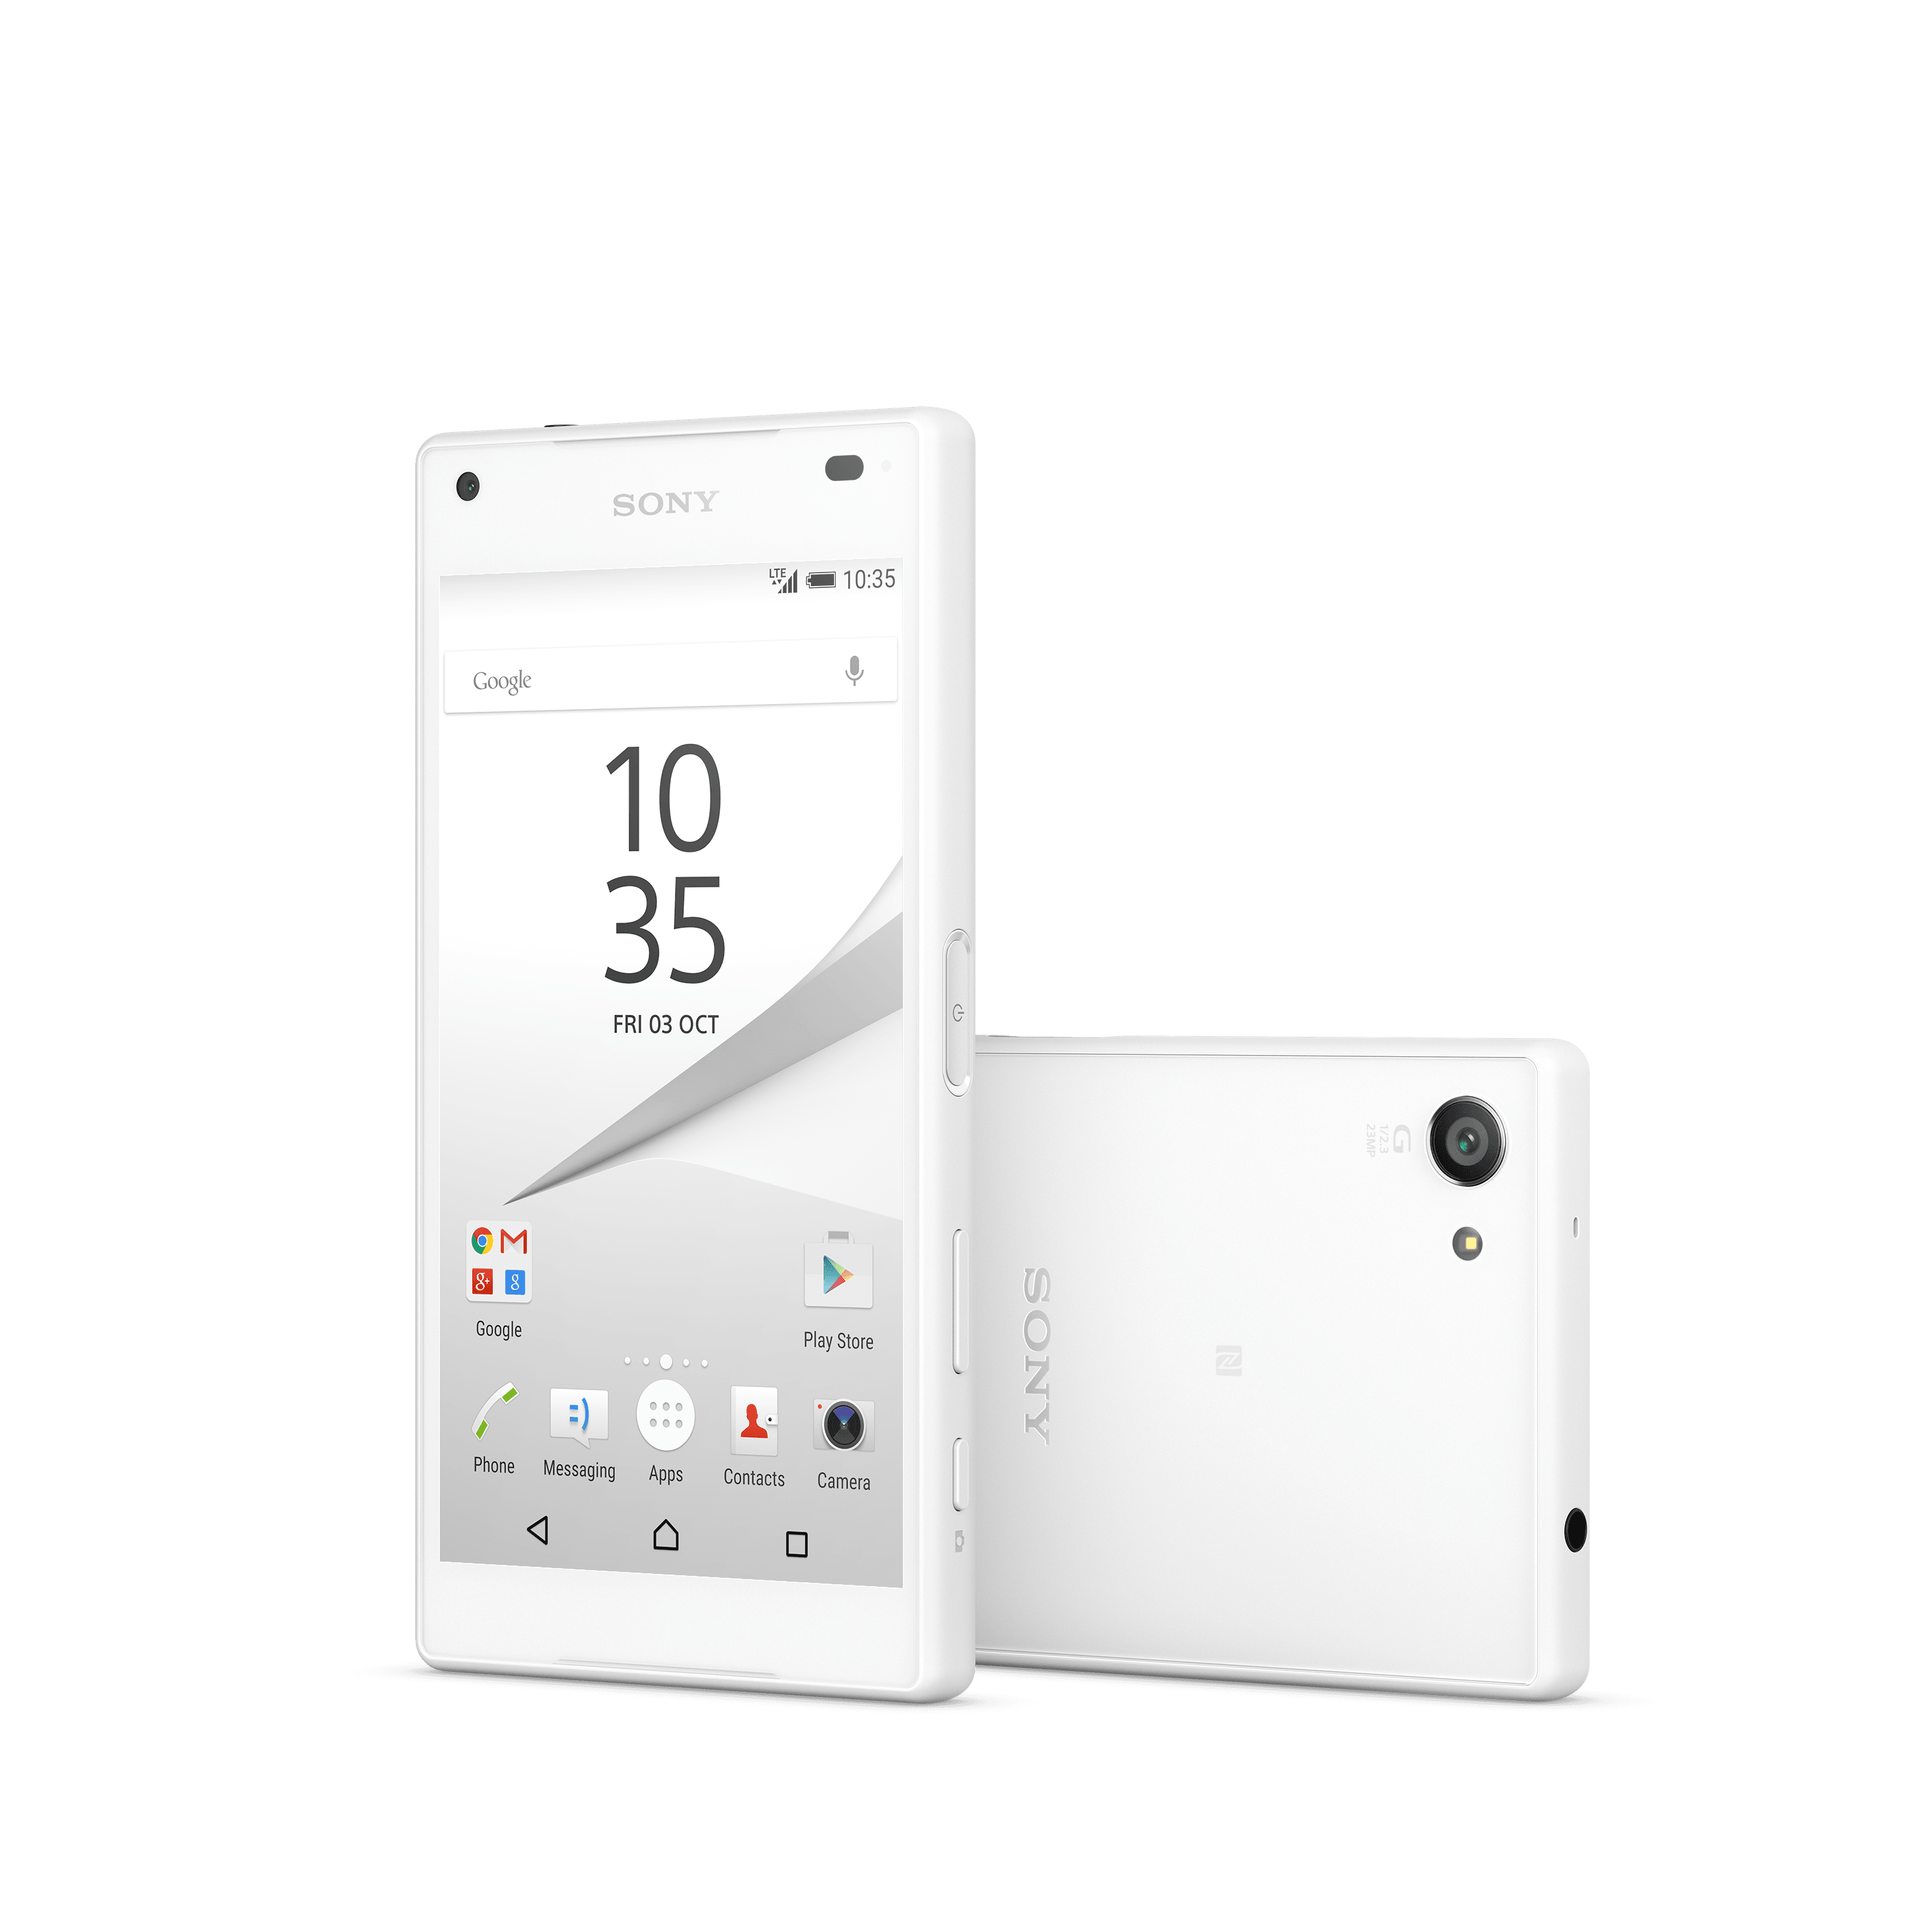 Sony Xperia Z5 and Z5 Compact now available in the USA